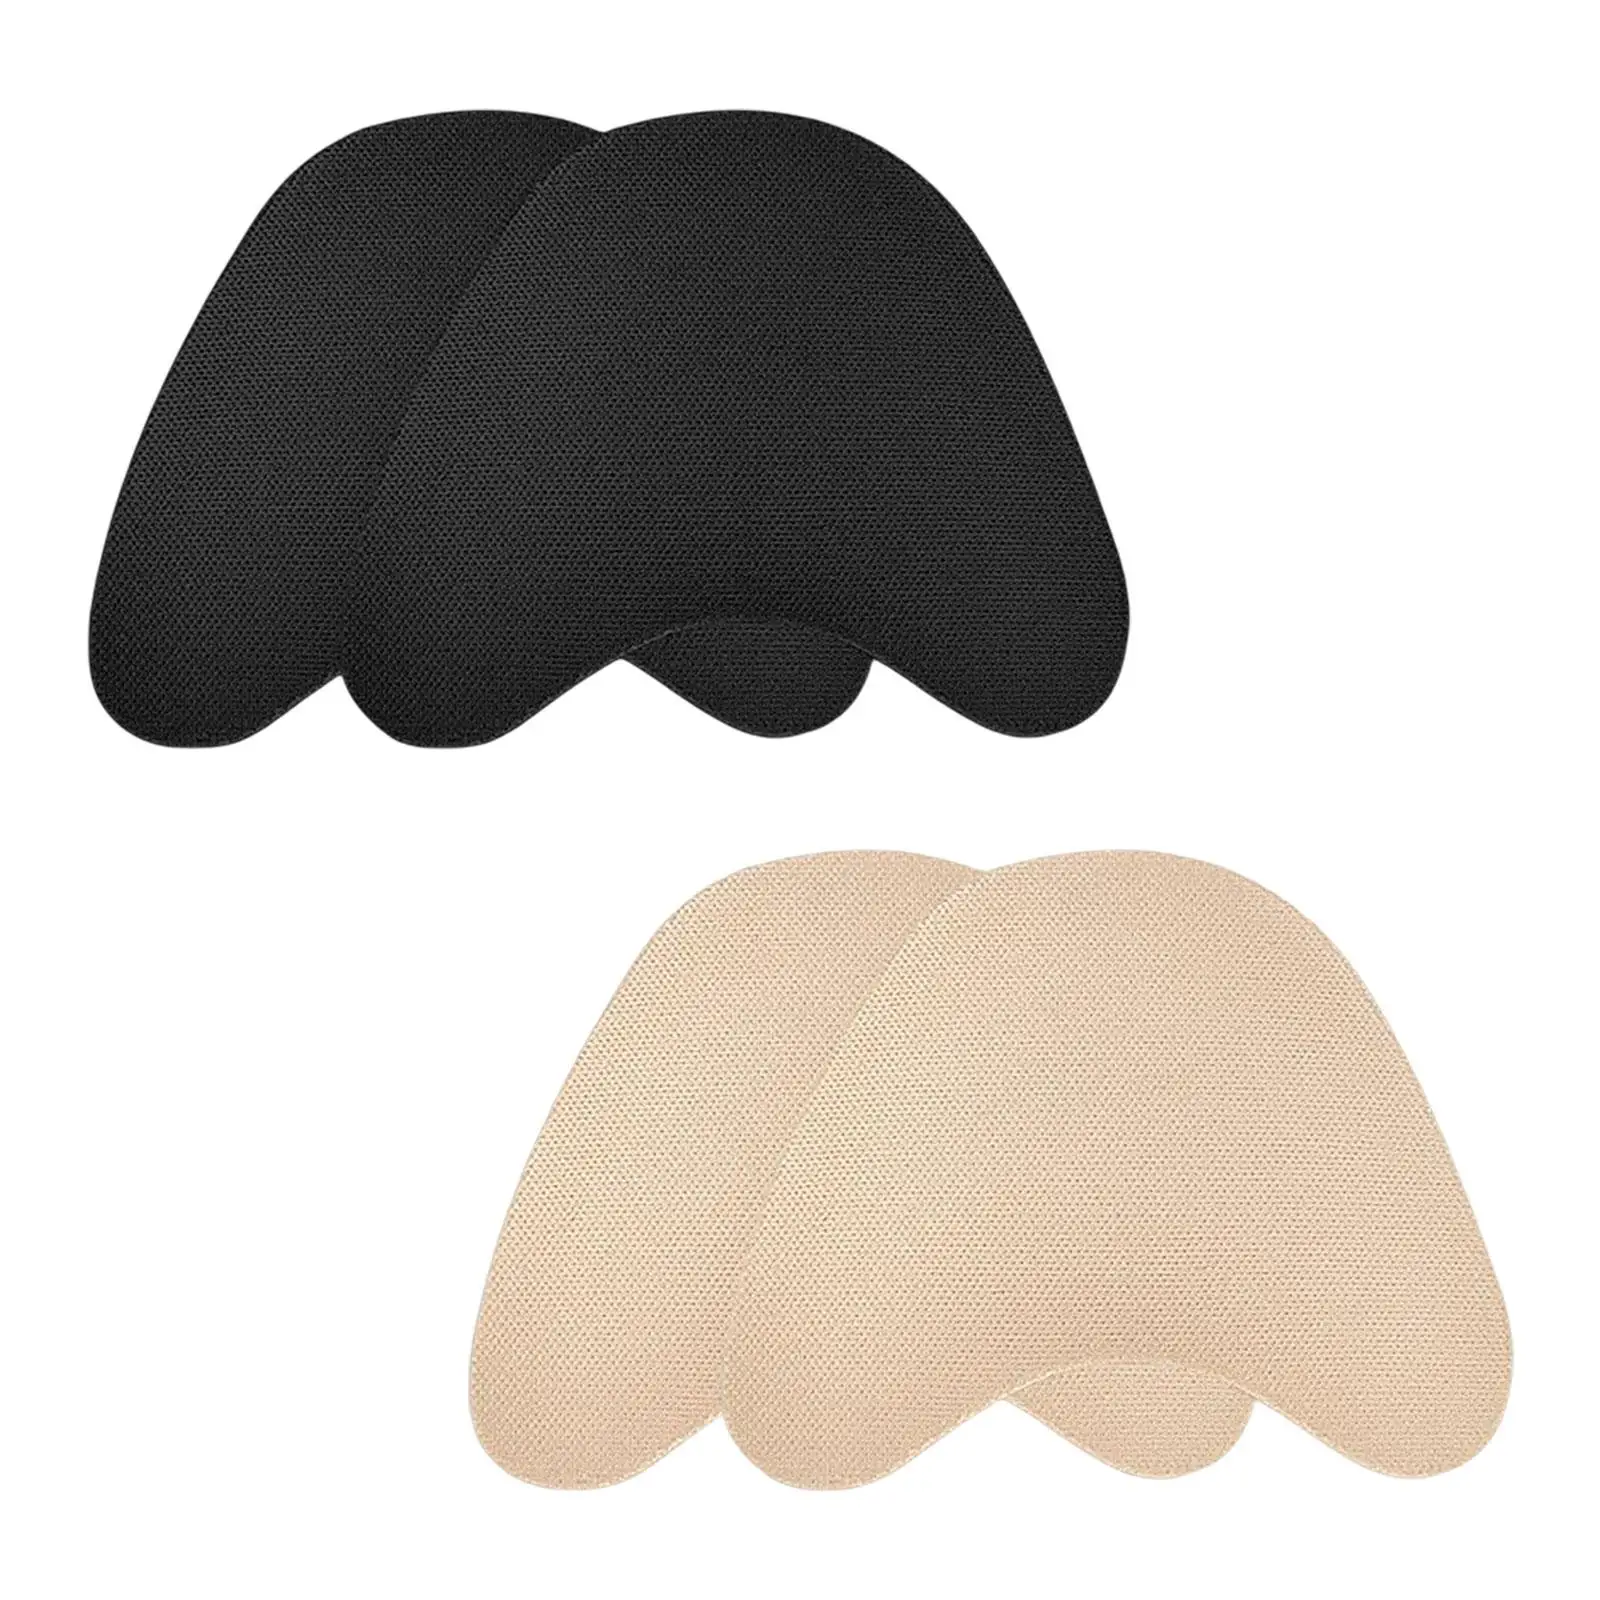 2 Pieces Shoes Filler Forefoot Pads Reusable Protector Foot Pads for Flats Shoes Too Big